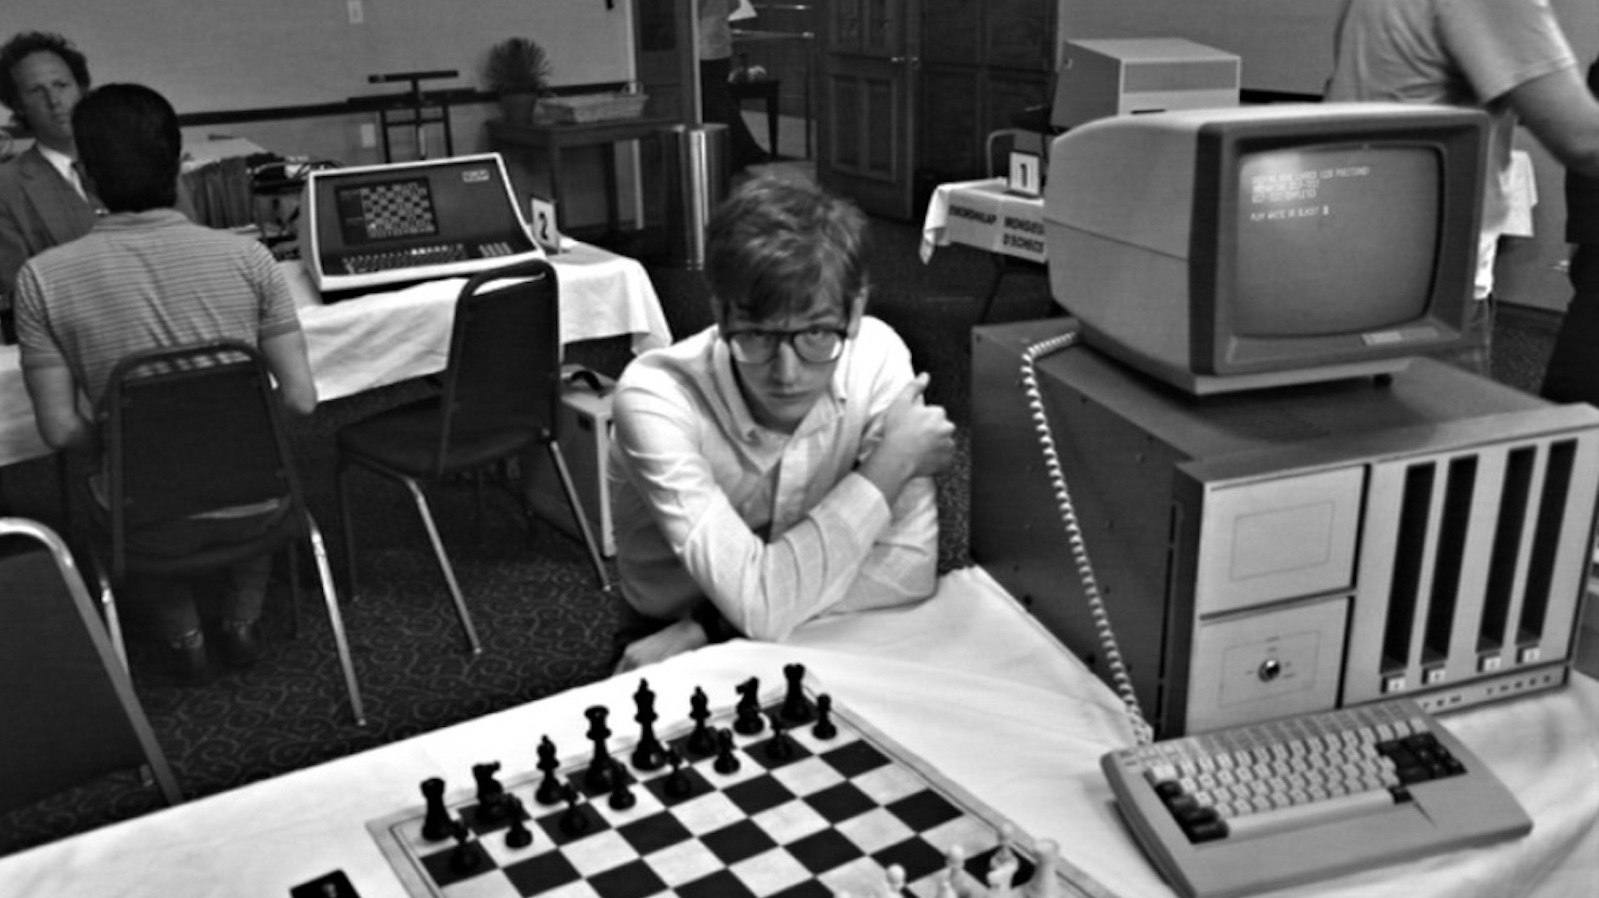 A young man in glasses sits before a chess board and an old fashioned desktop computer in a black and white image